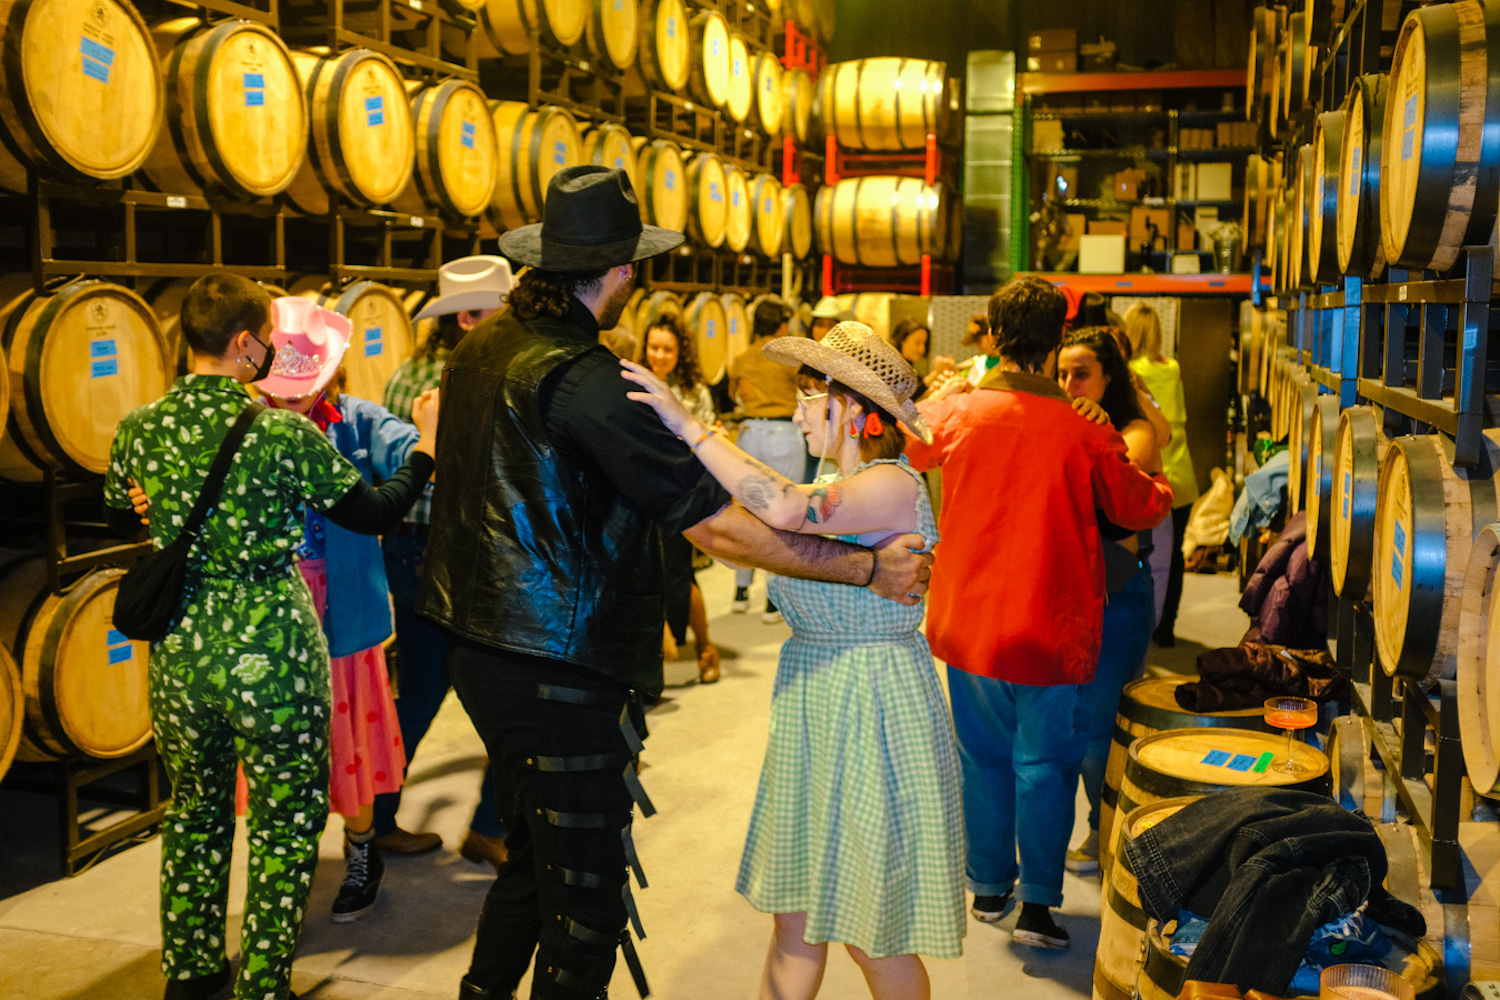 People dancing in country outfits in a room filled with barrels 